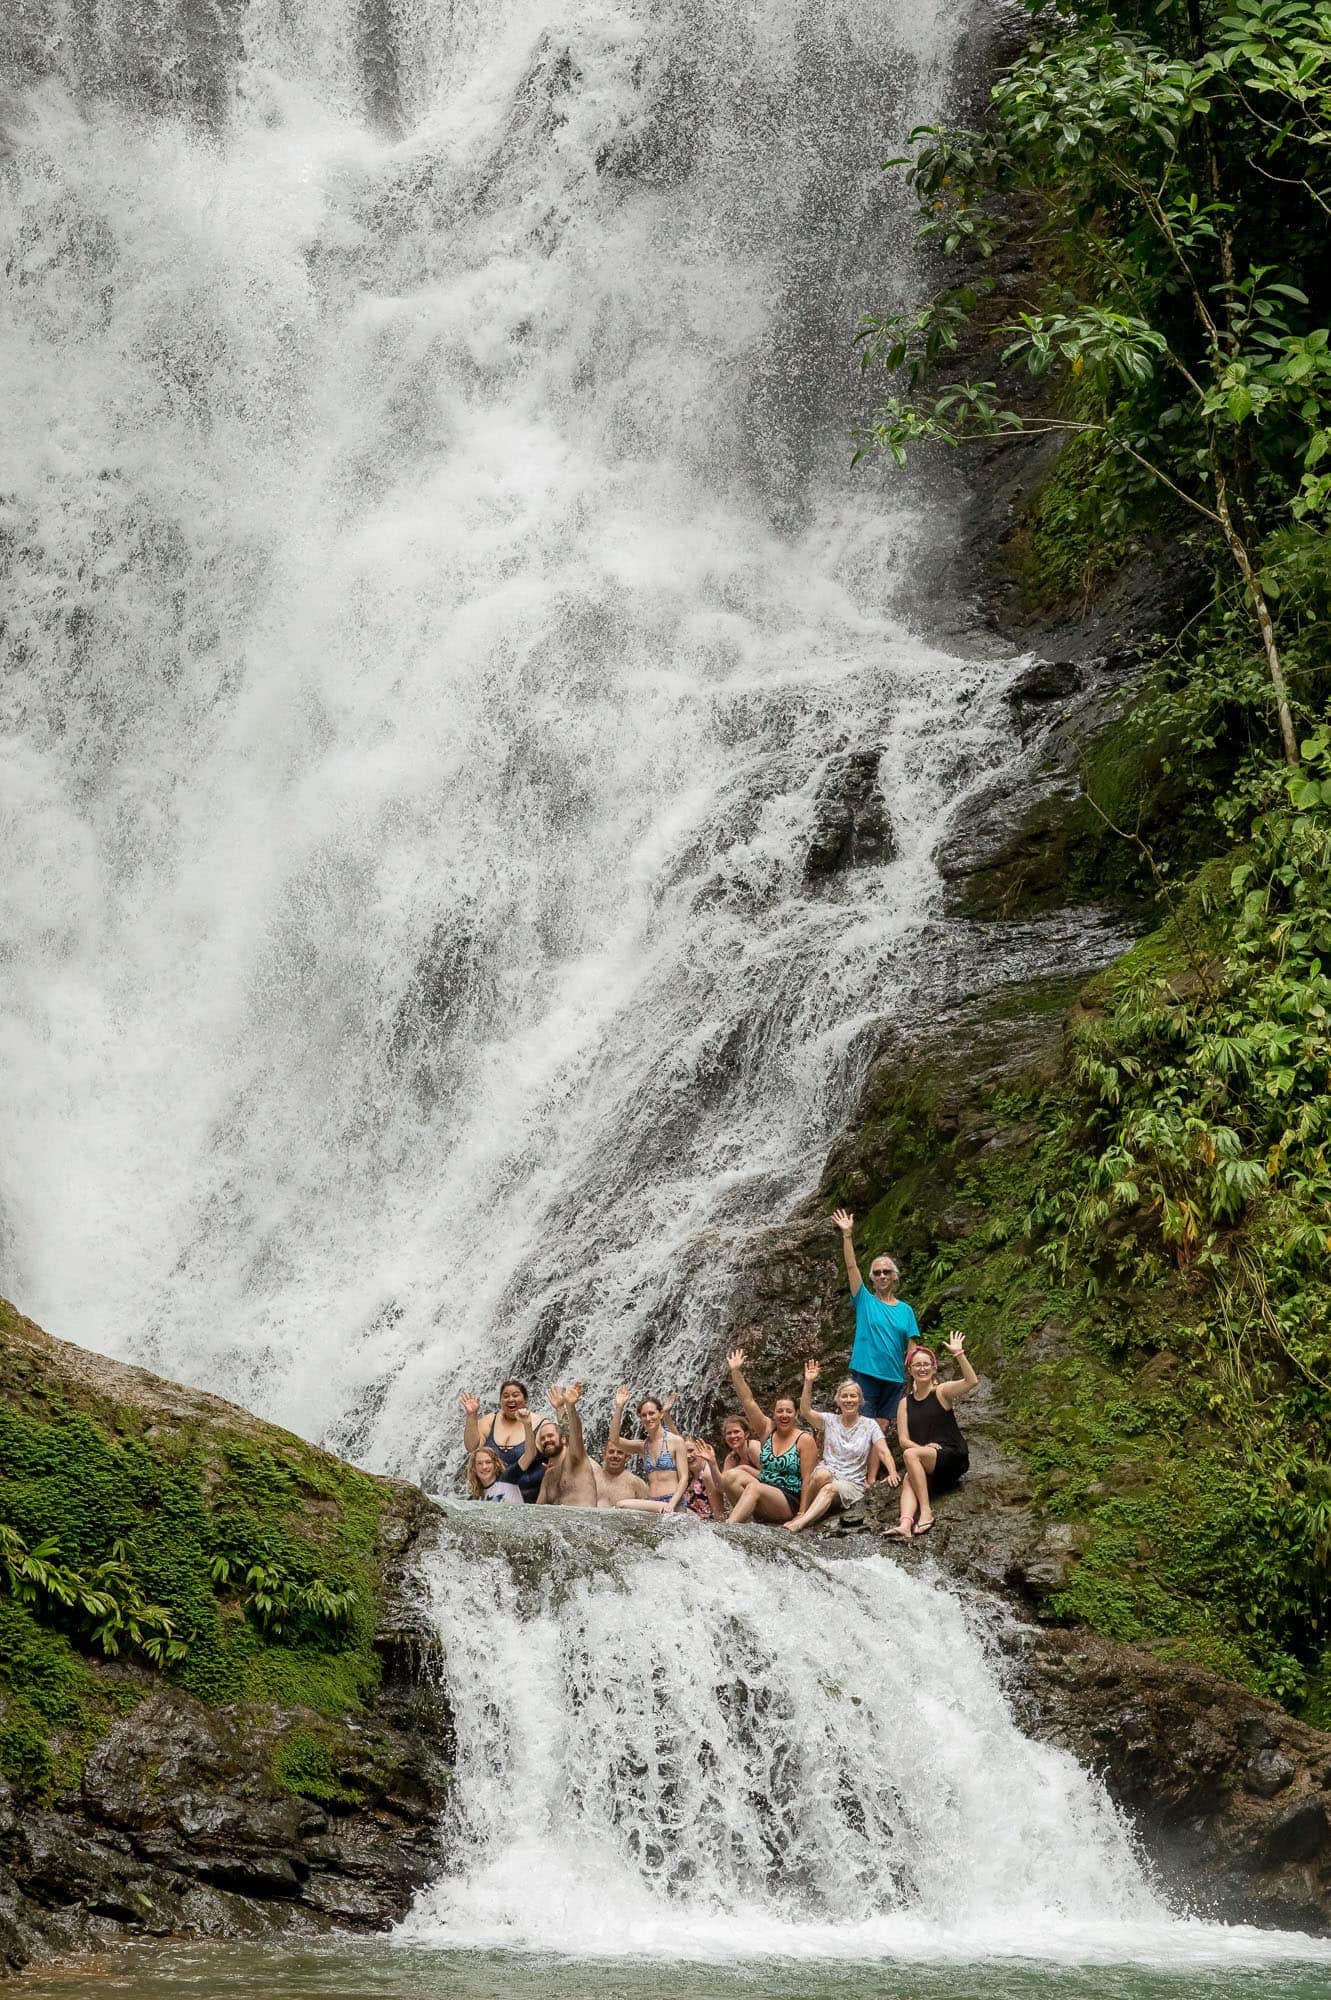 The wedding party off the beaten path in Costa Rica at the base of a waterfall